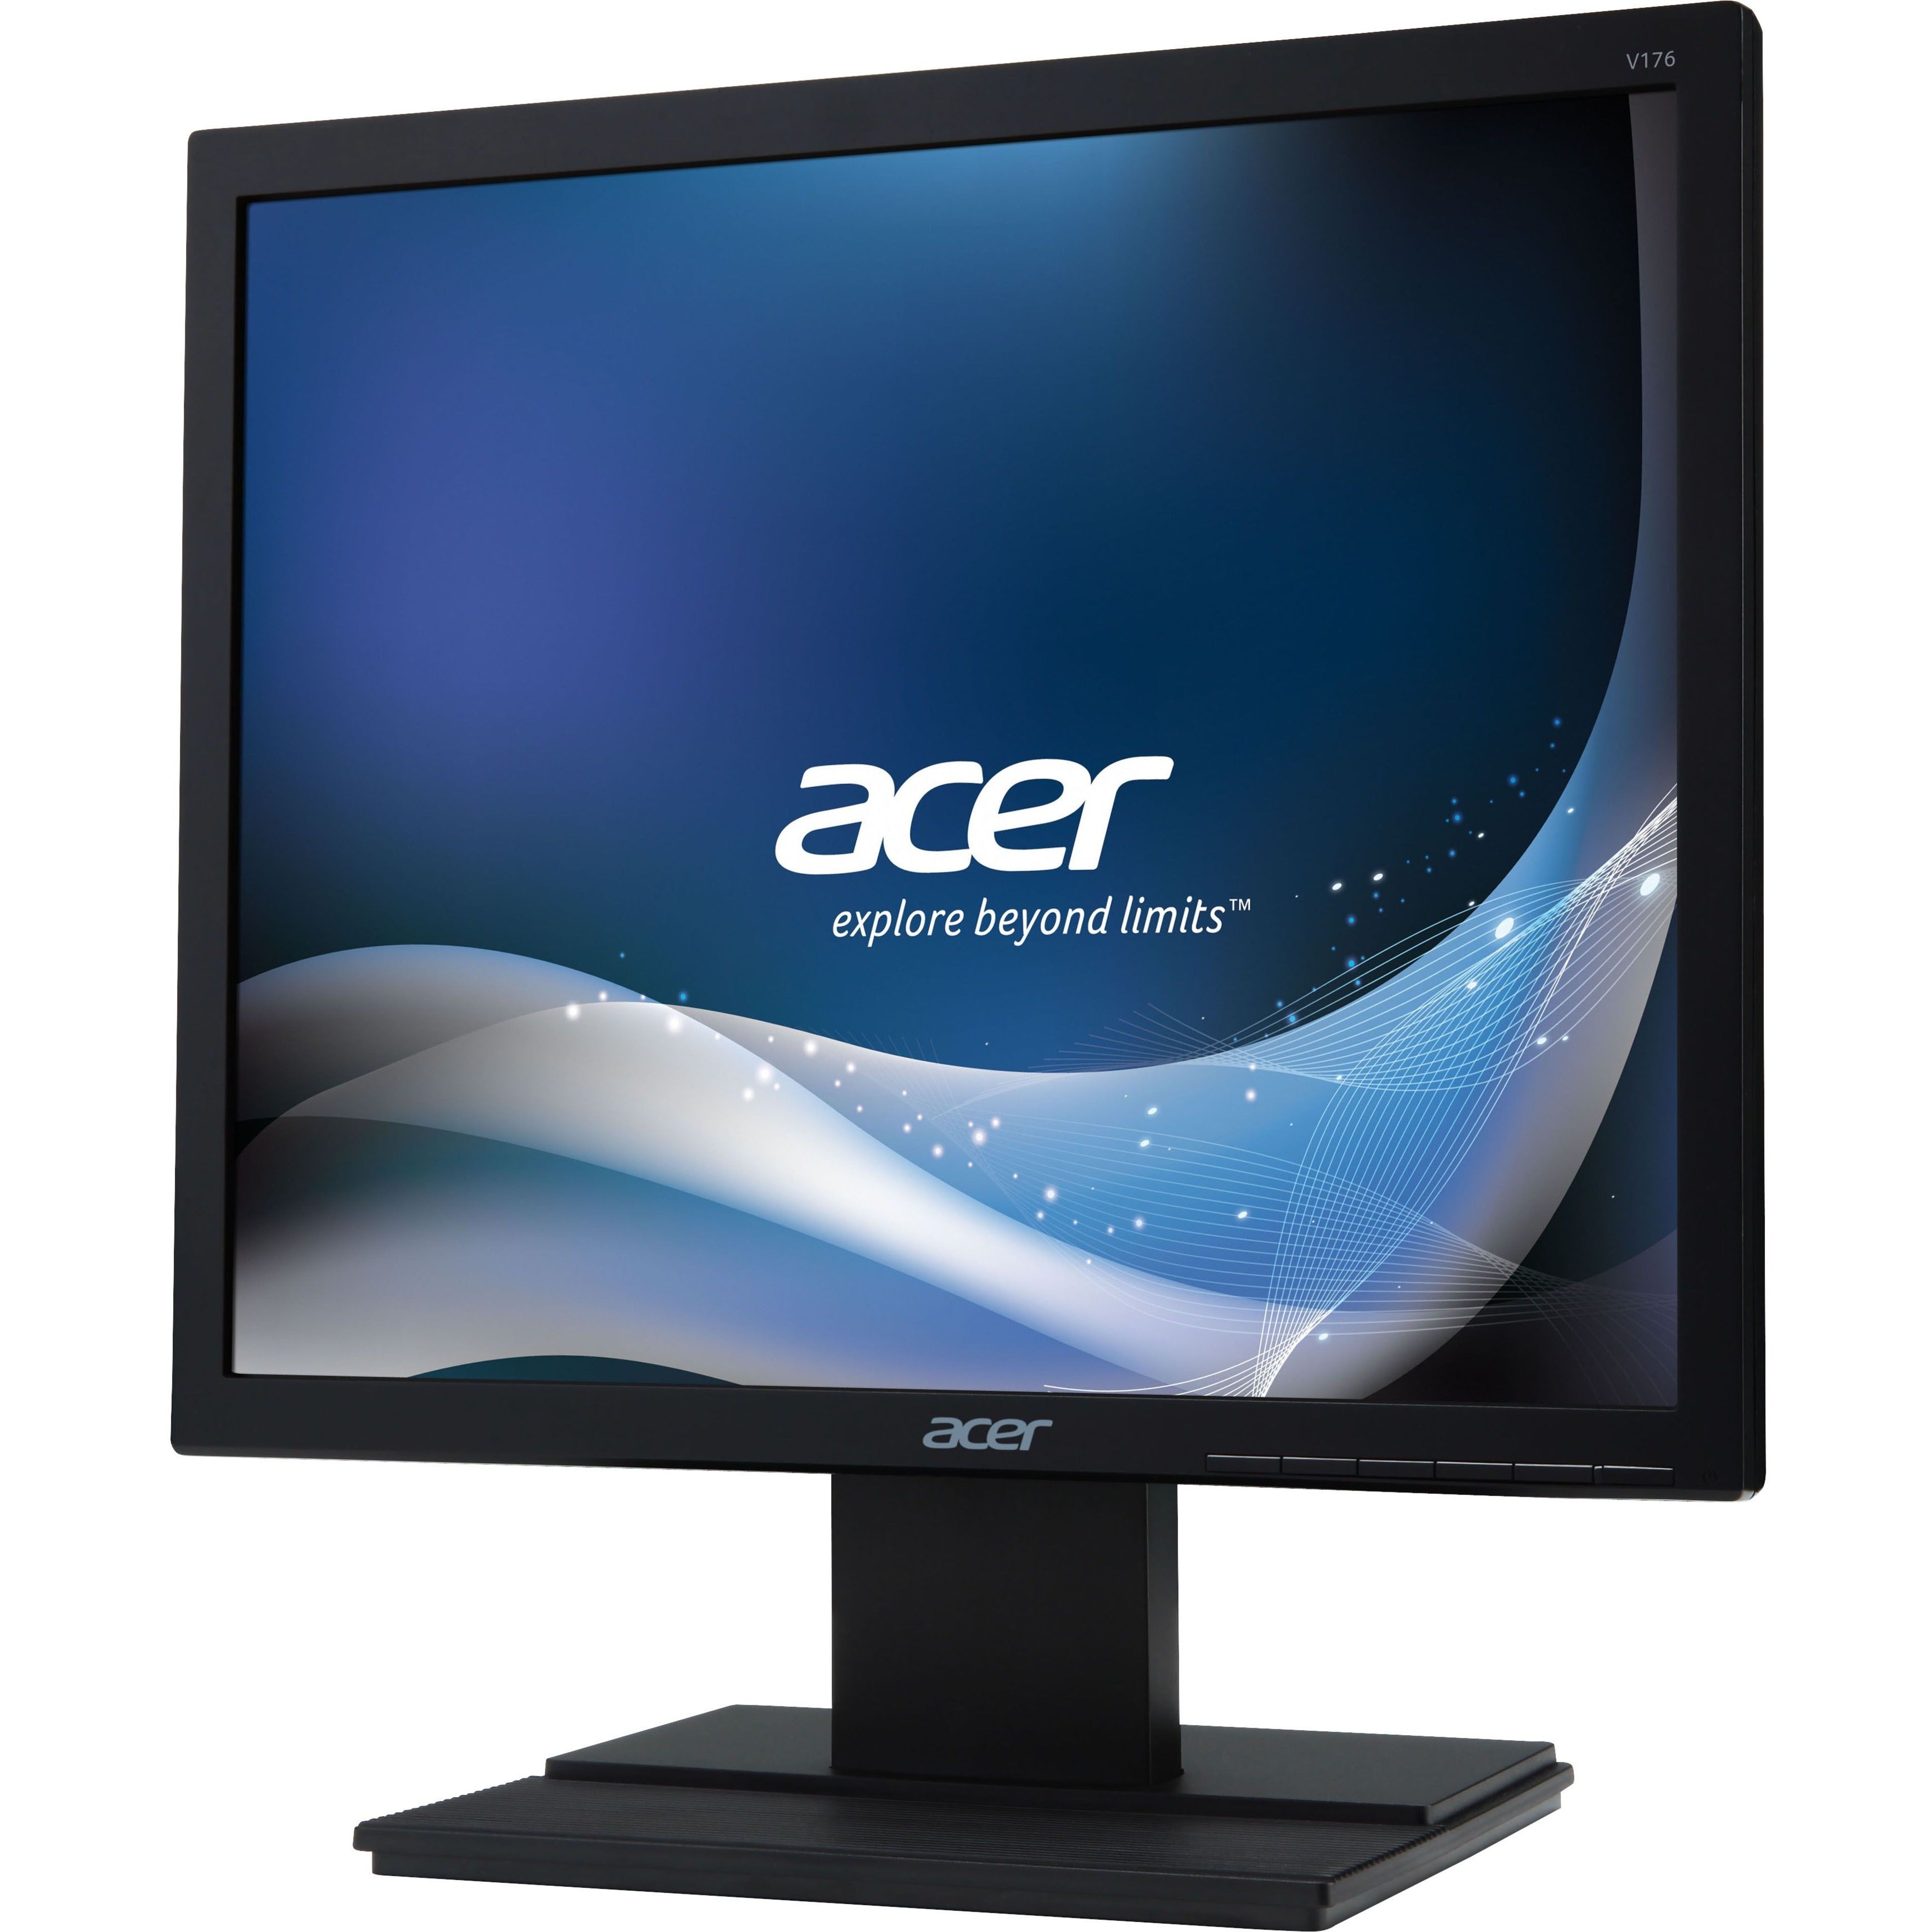 Acer UM.BV6AA.002 V176L LCD Monitor, 17 5:4, 5ms Response Time, 100000000:1 Contrast Ratio